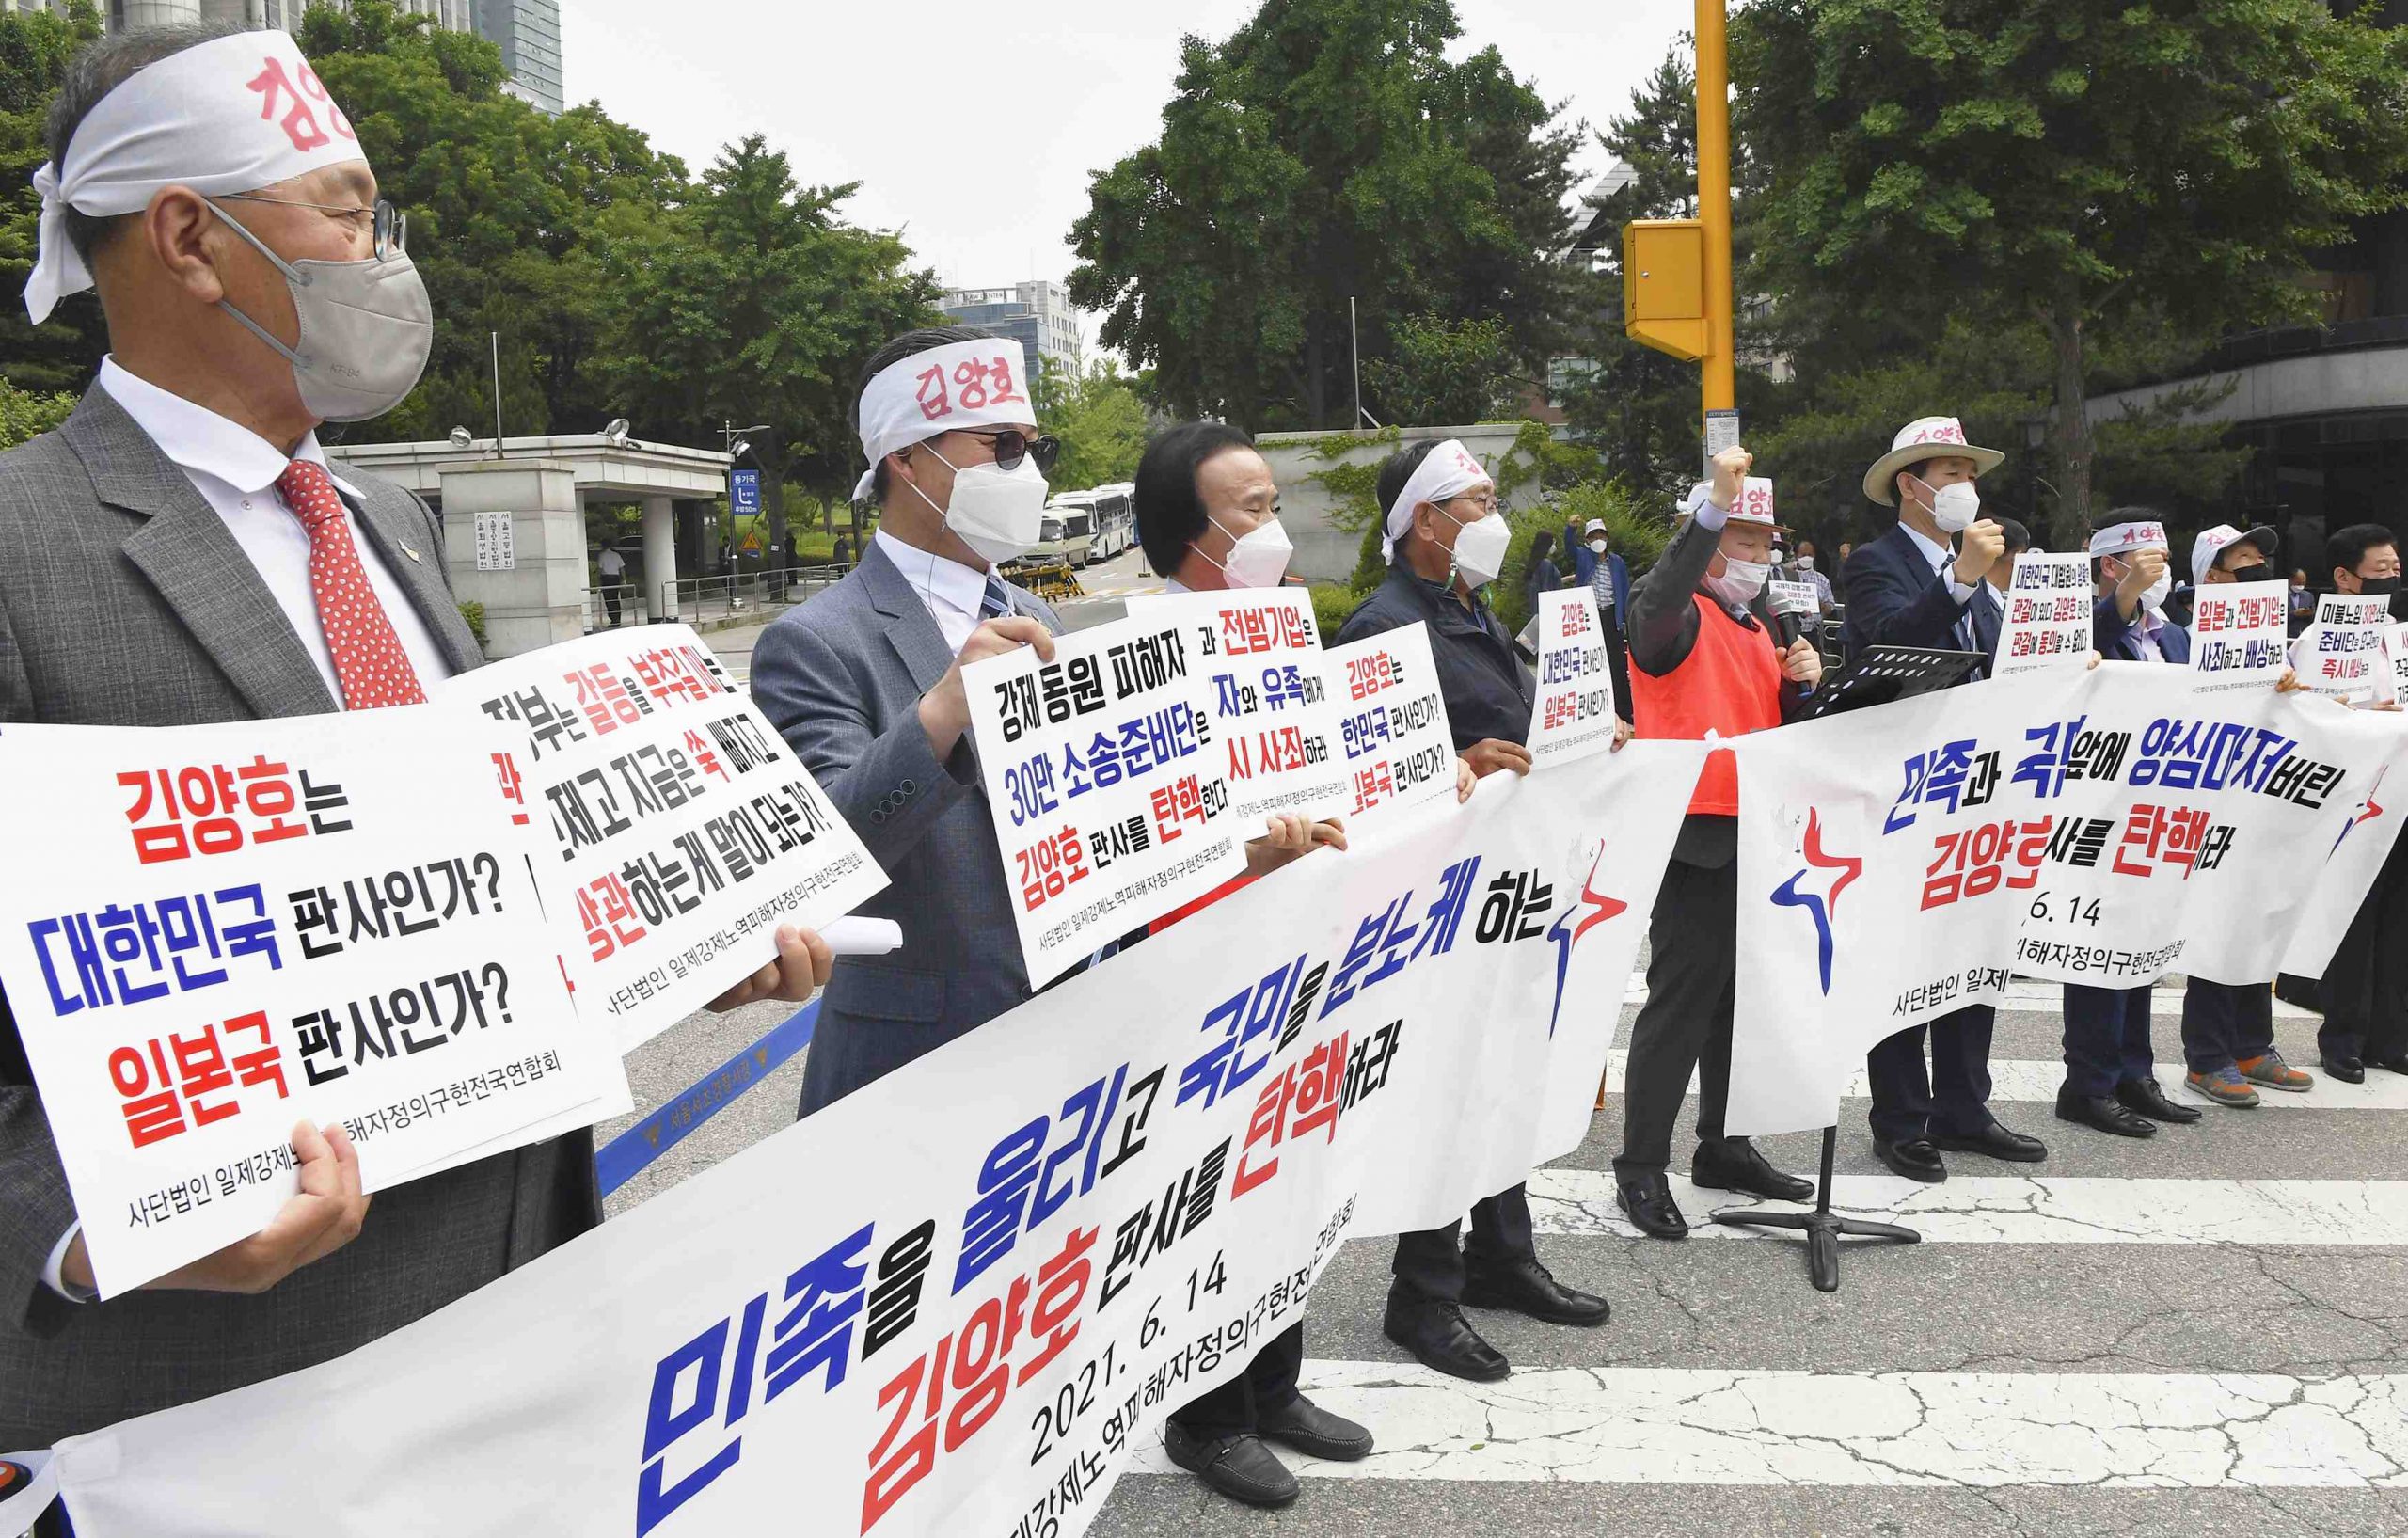 North Korea joins South Korean protest over Japan's 'Rising Sun